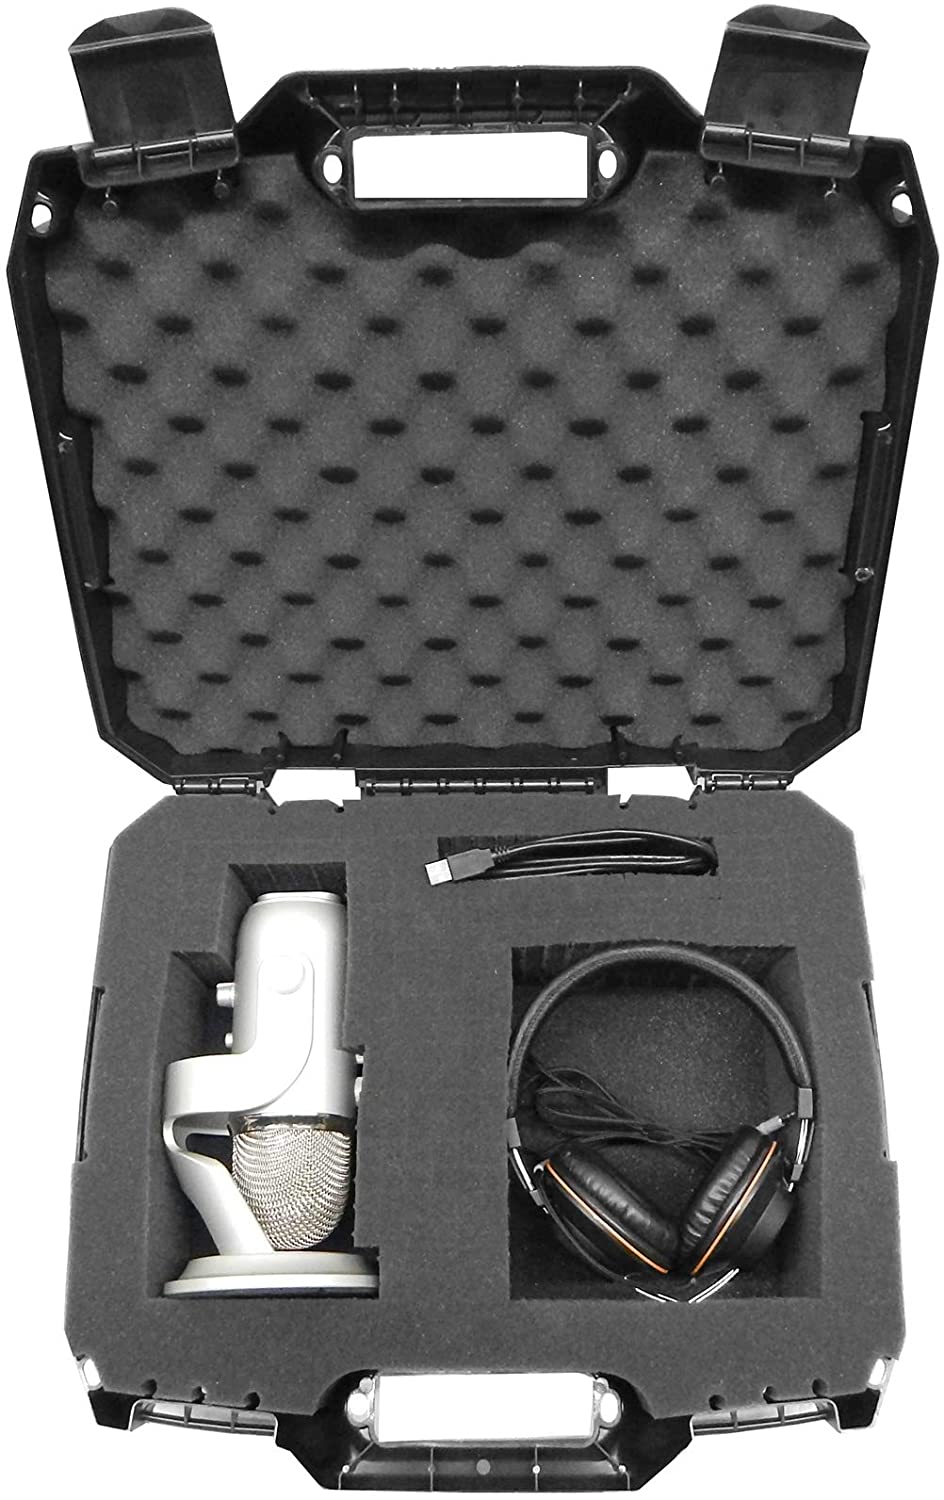 CASEMATIX Microphone Hard Case Fits HyperX QuadCast, Blue Yeti Computer Mic, Razer Seiren Samson G-Track Pro and Recording/Gaming Accessories | Lightweight & Affordable Hard Cases For Microphones, Guns, PS5s